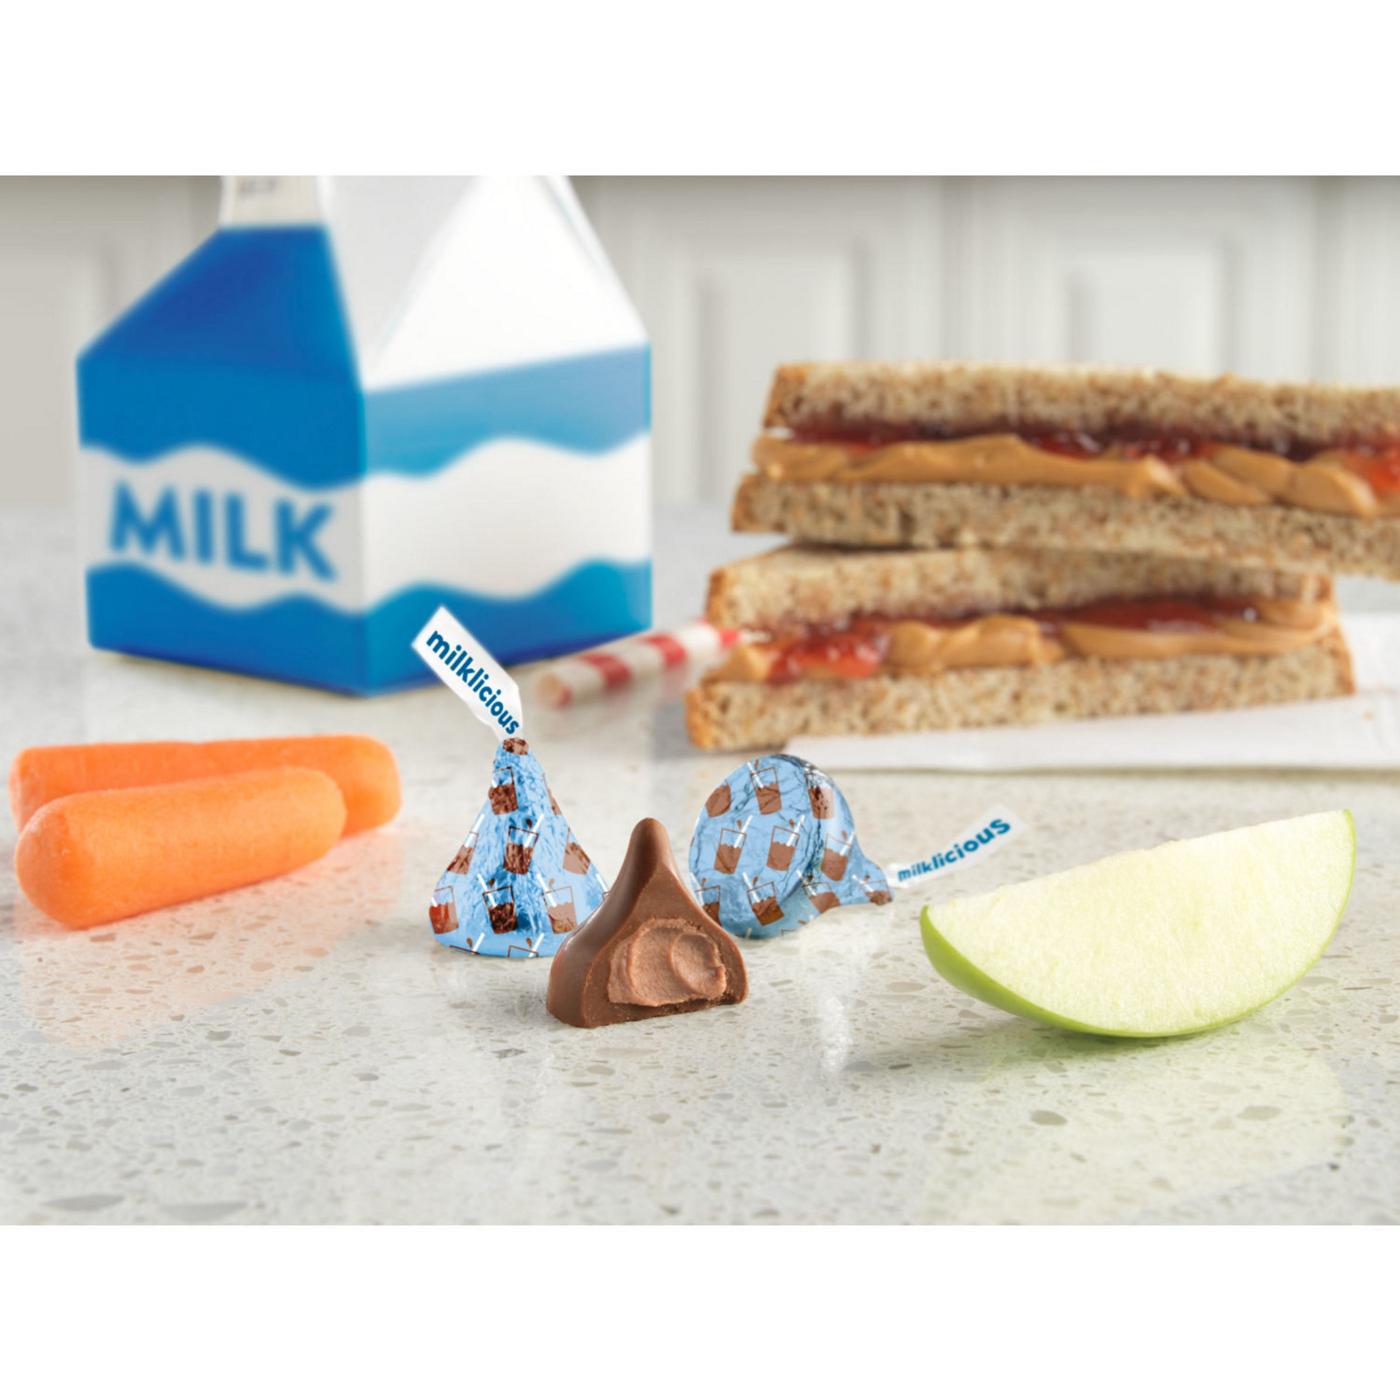 Hershey's Kisses Milklicious Milk Chocolate Candy - Share Pack; image 6 of 7